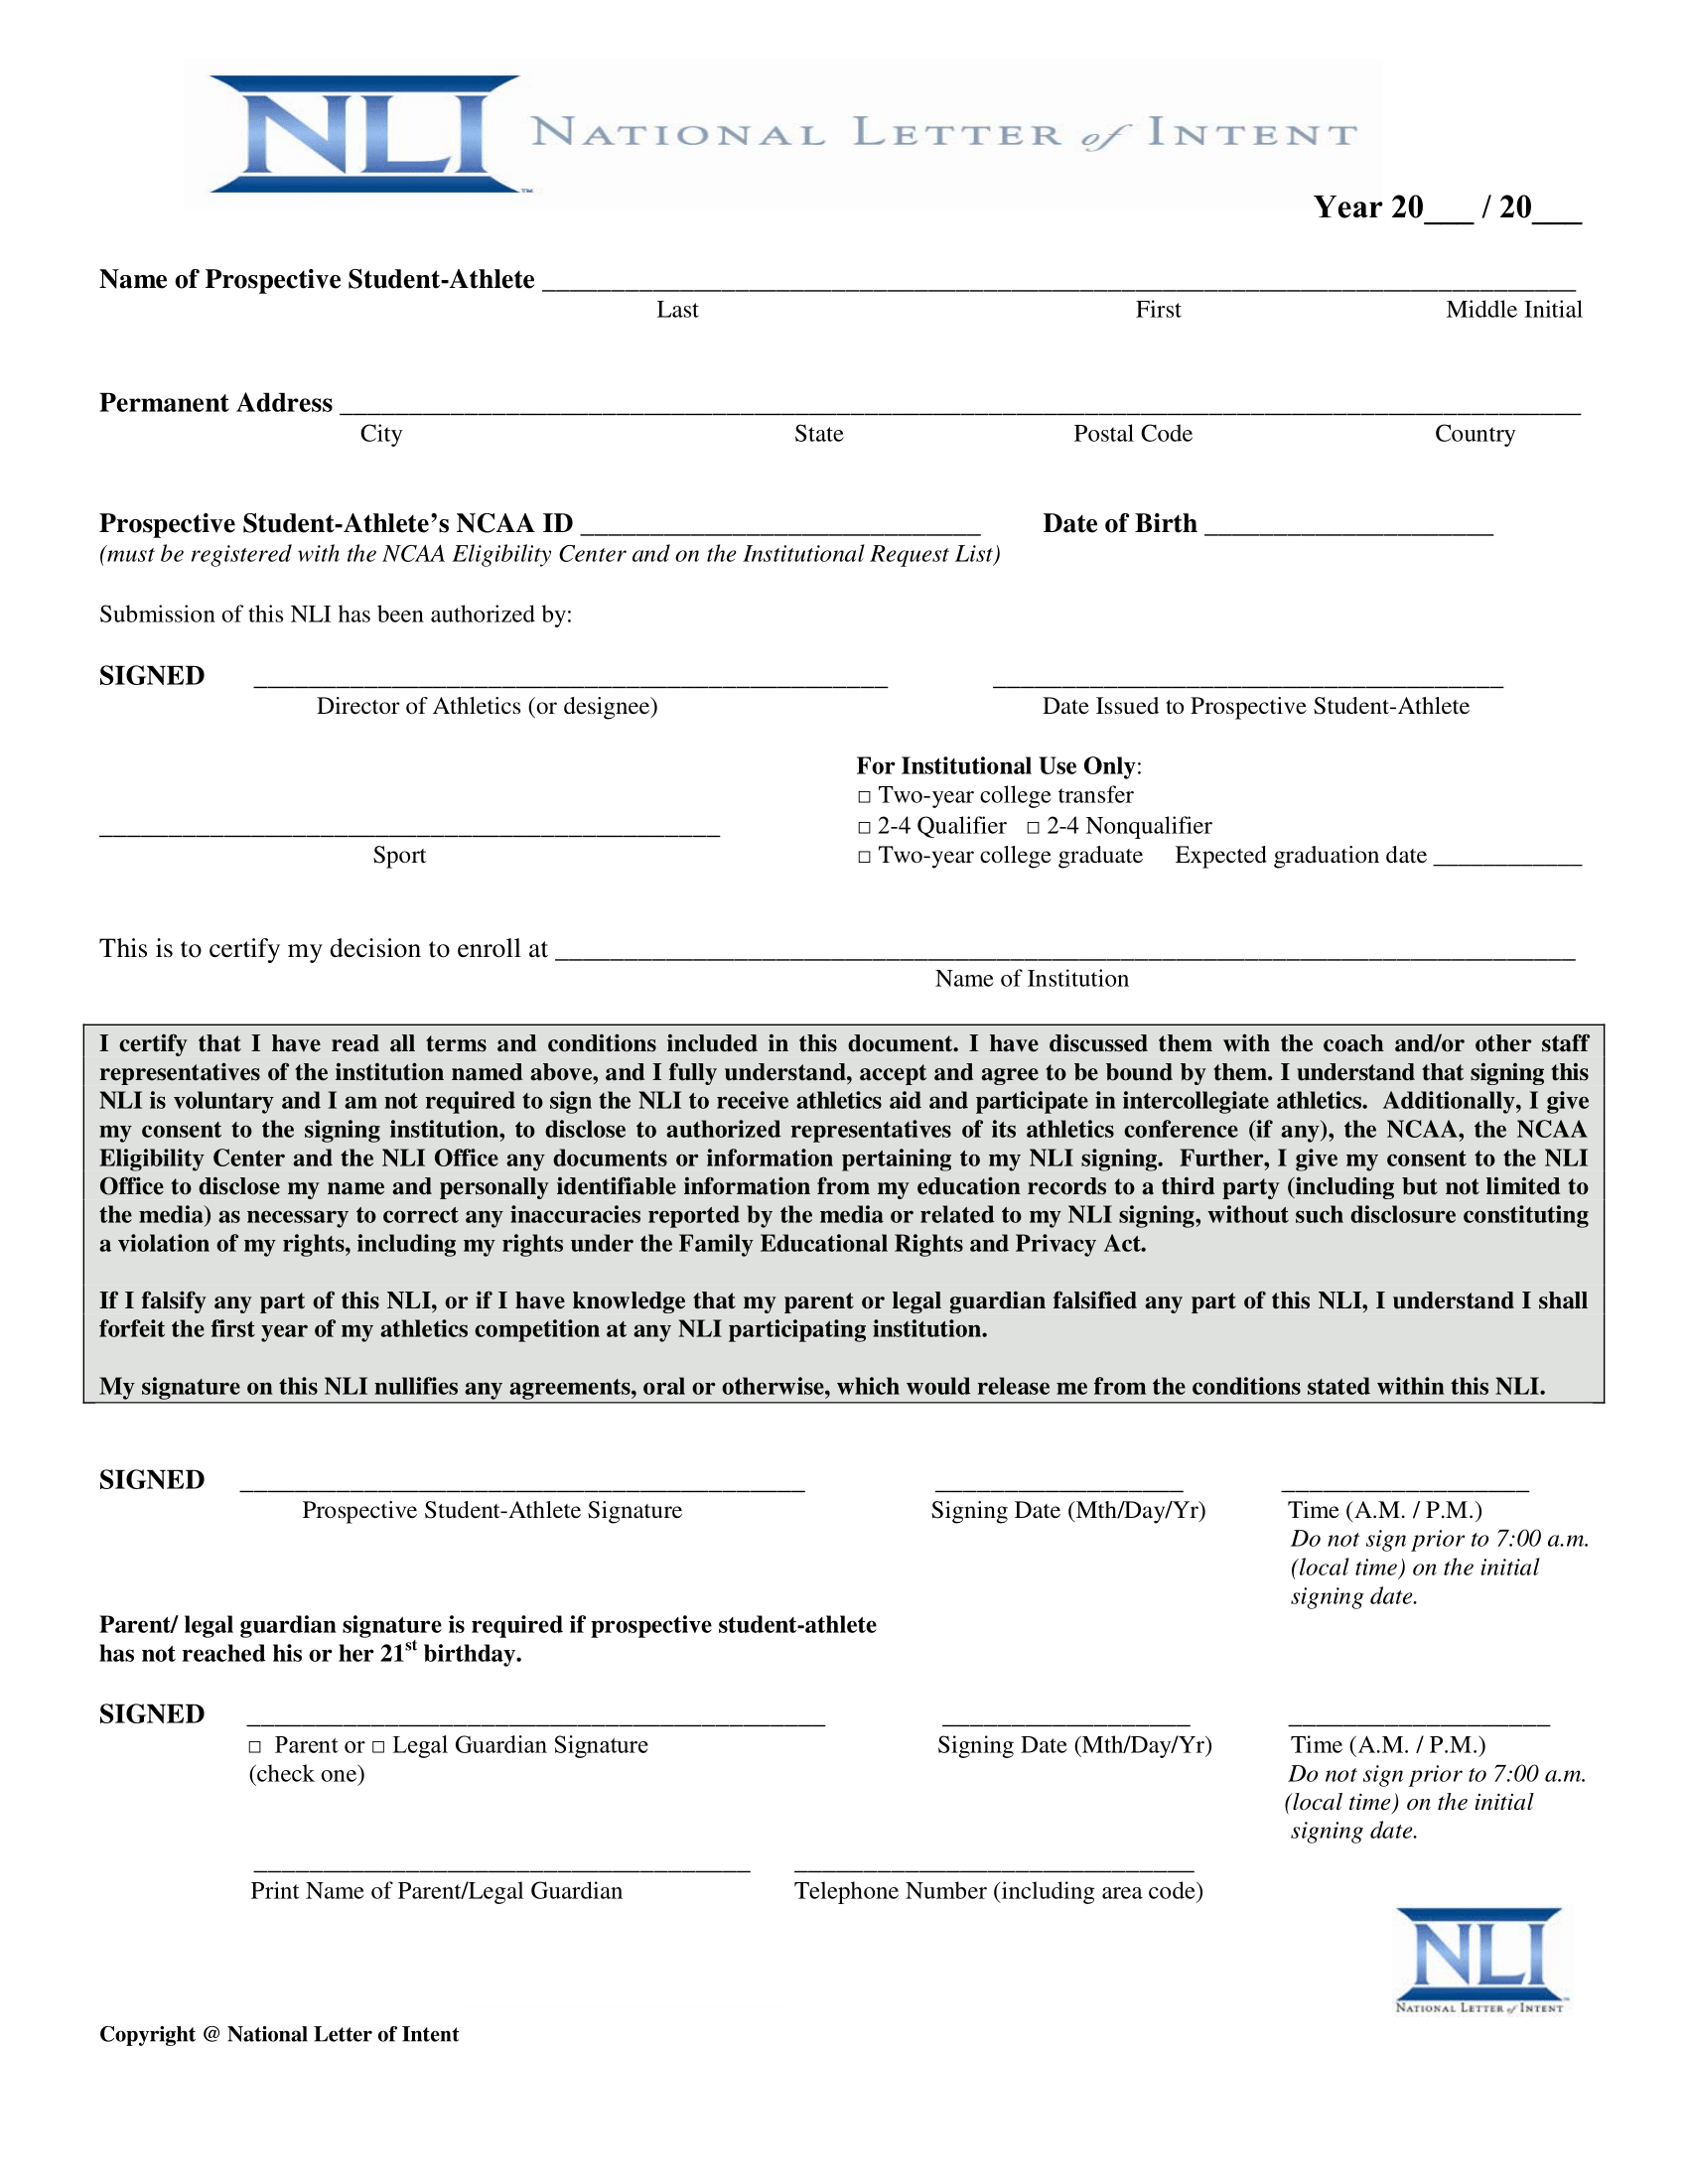 national letter of intent (NLI) template